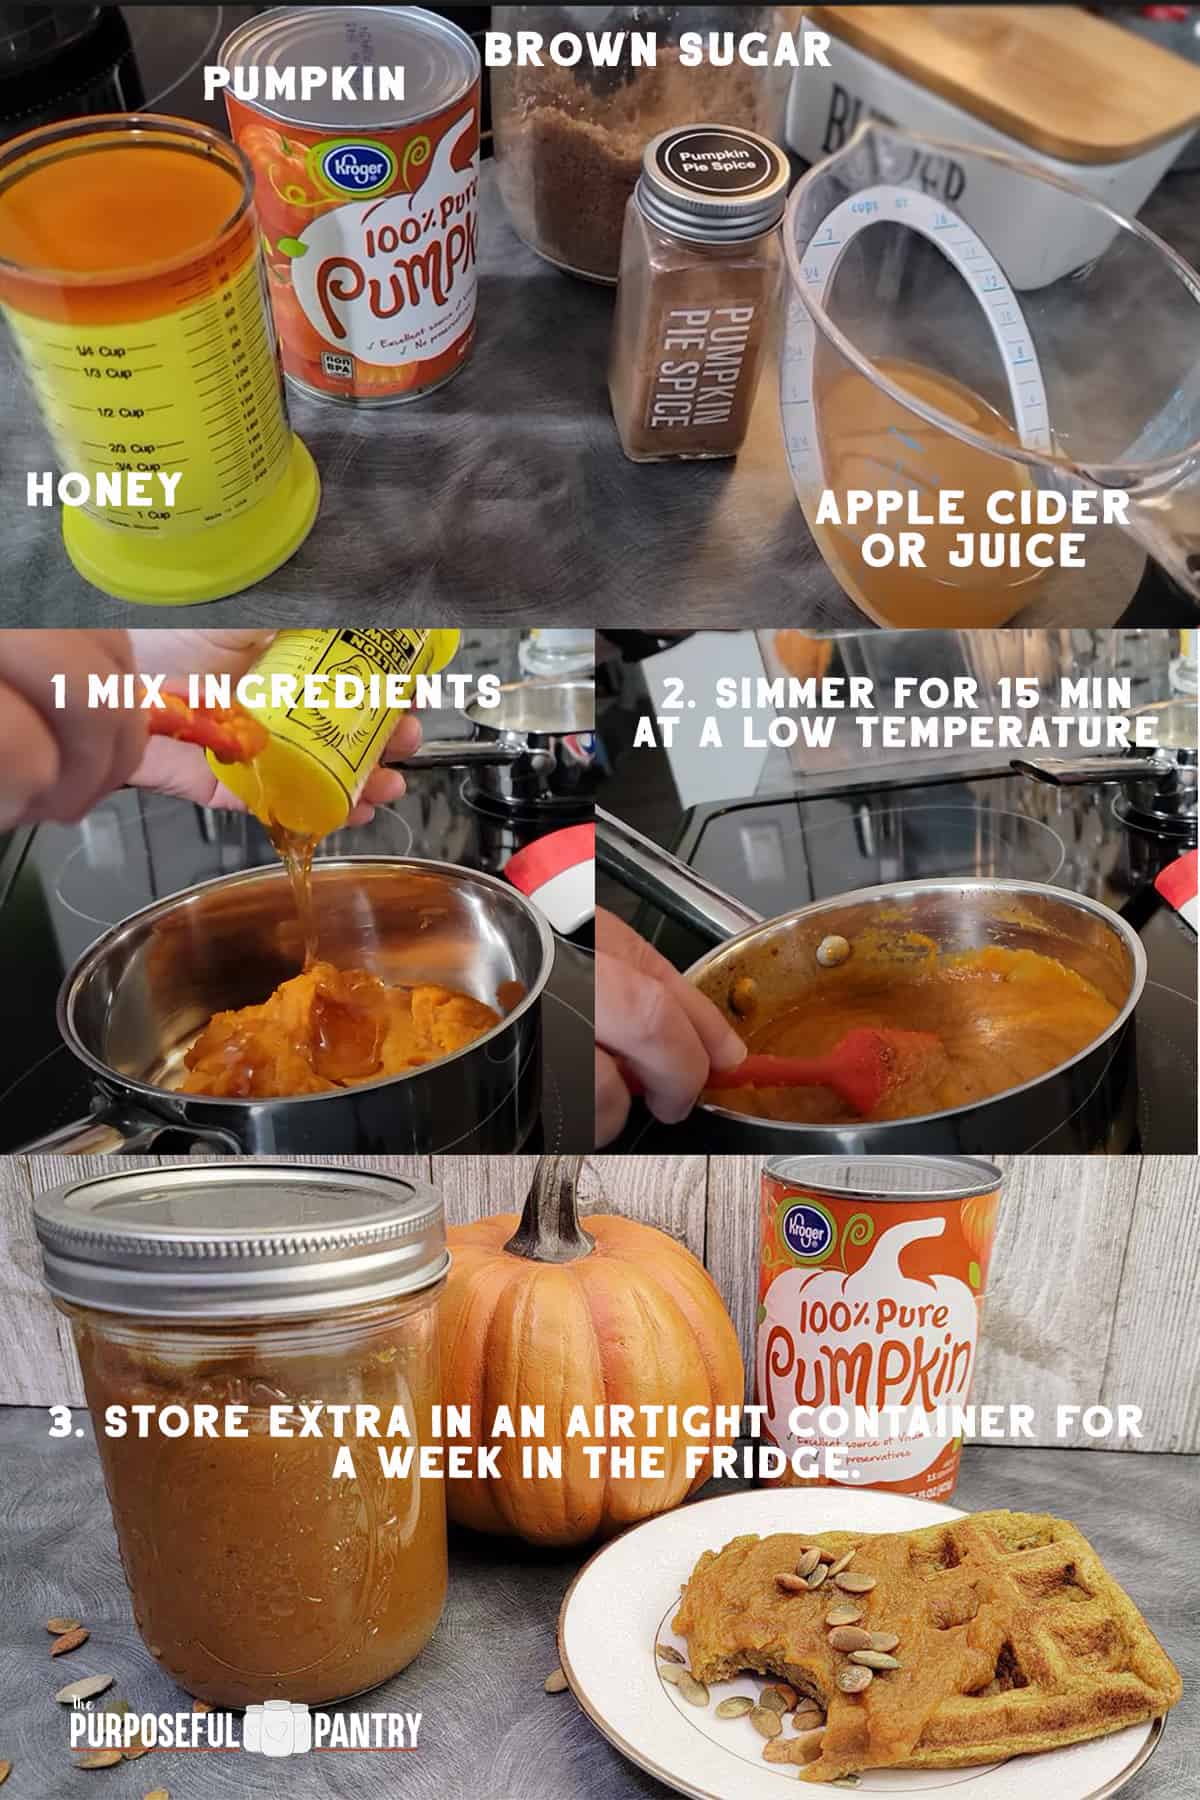 Ingredients and process shots of creating pumpkin butter